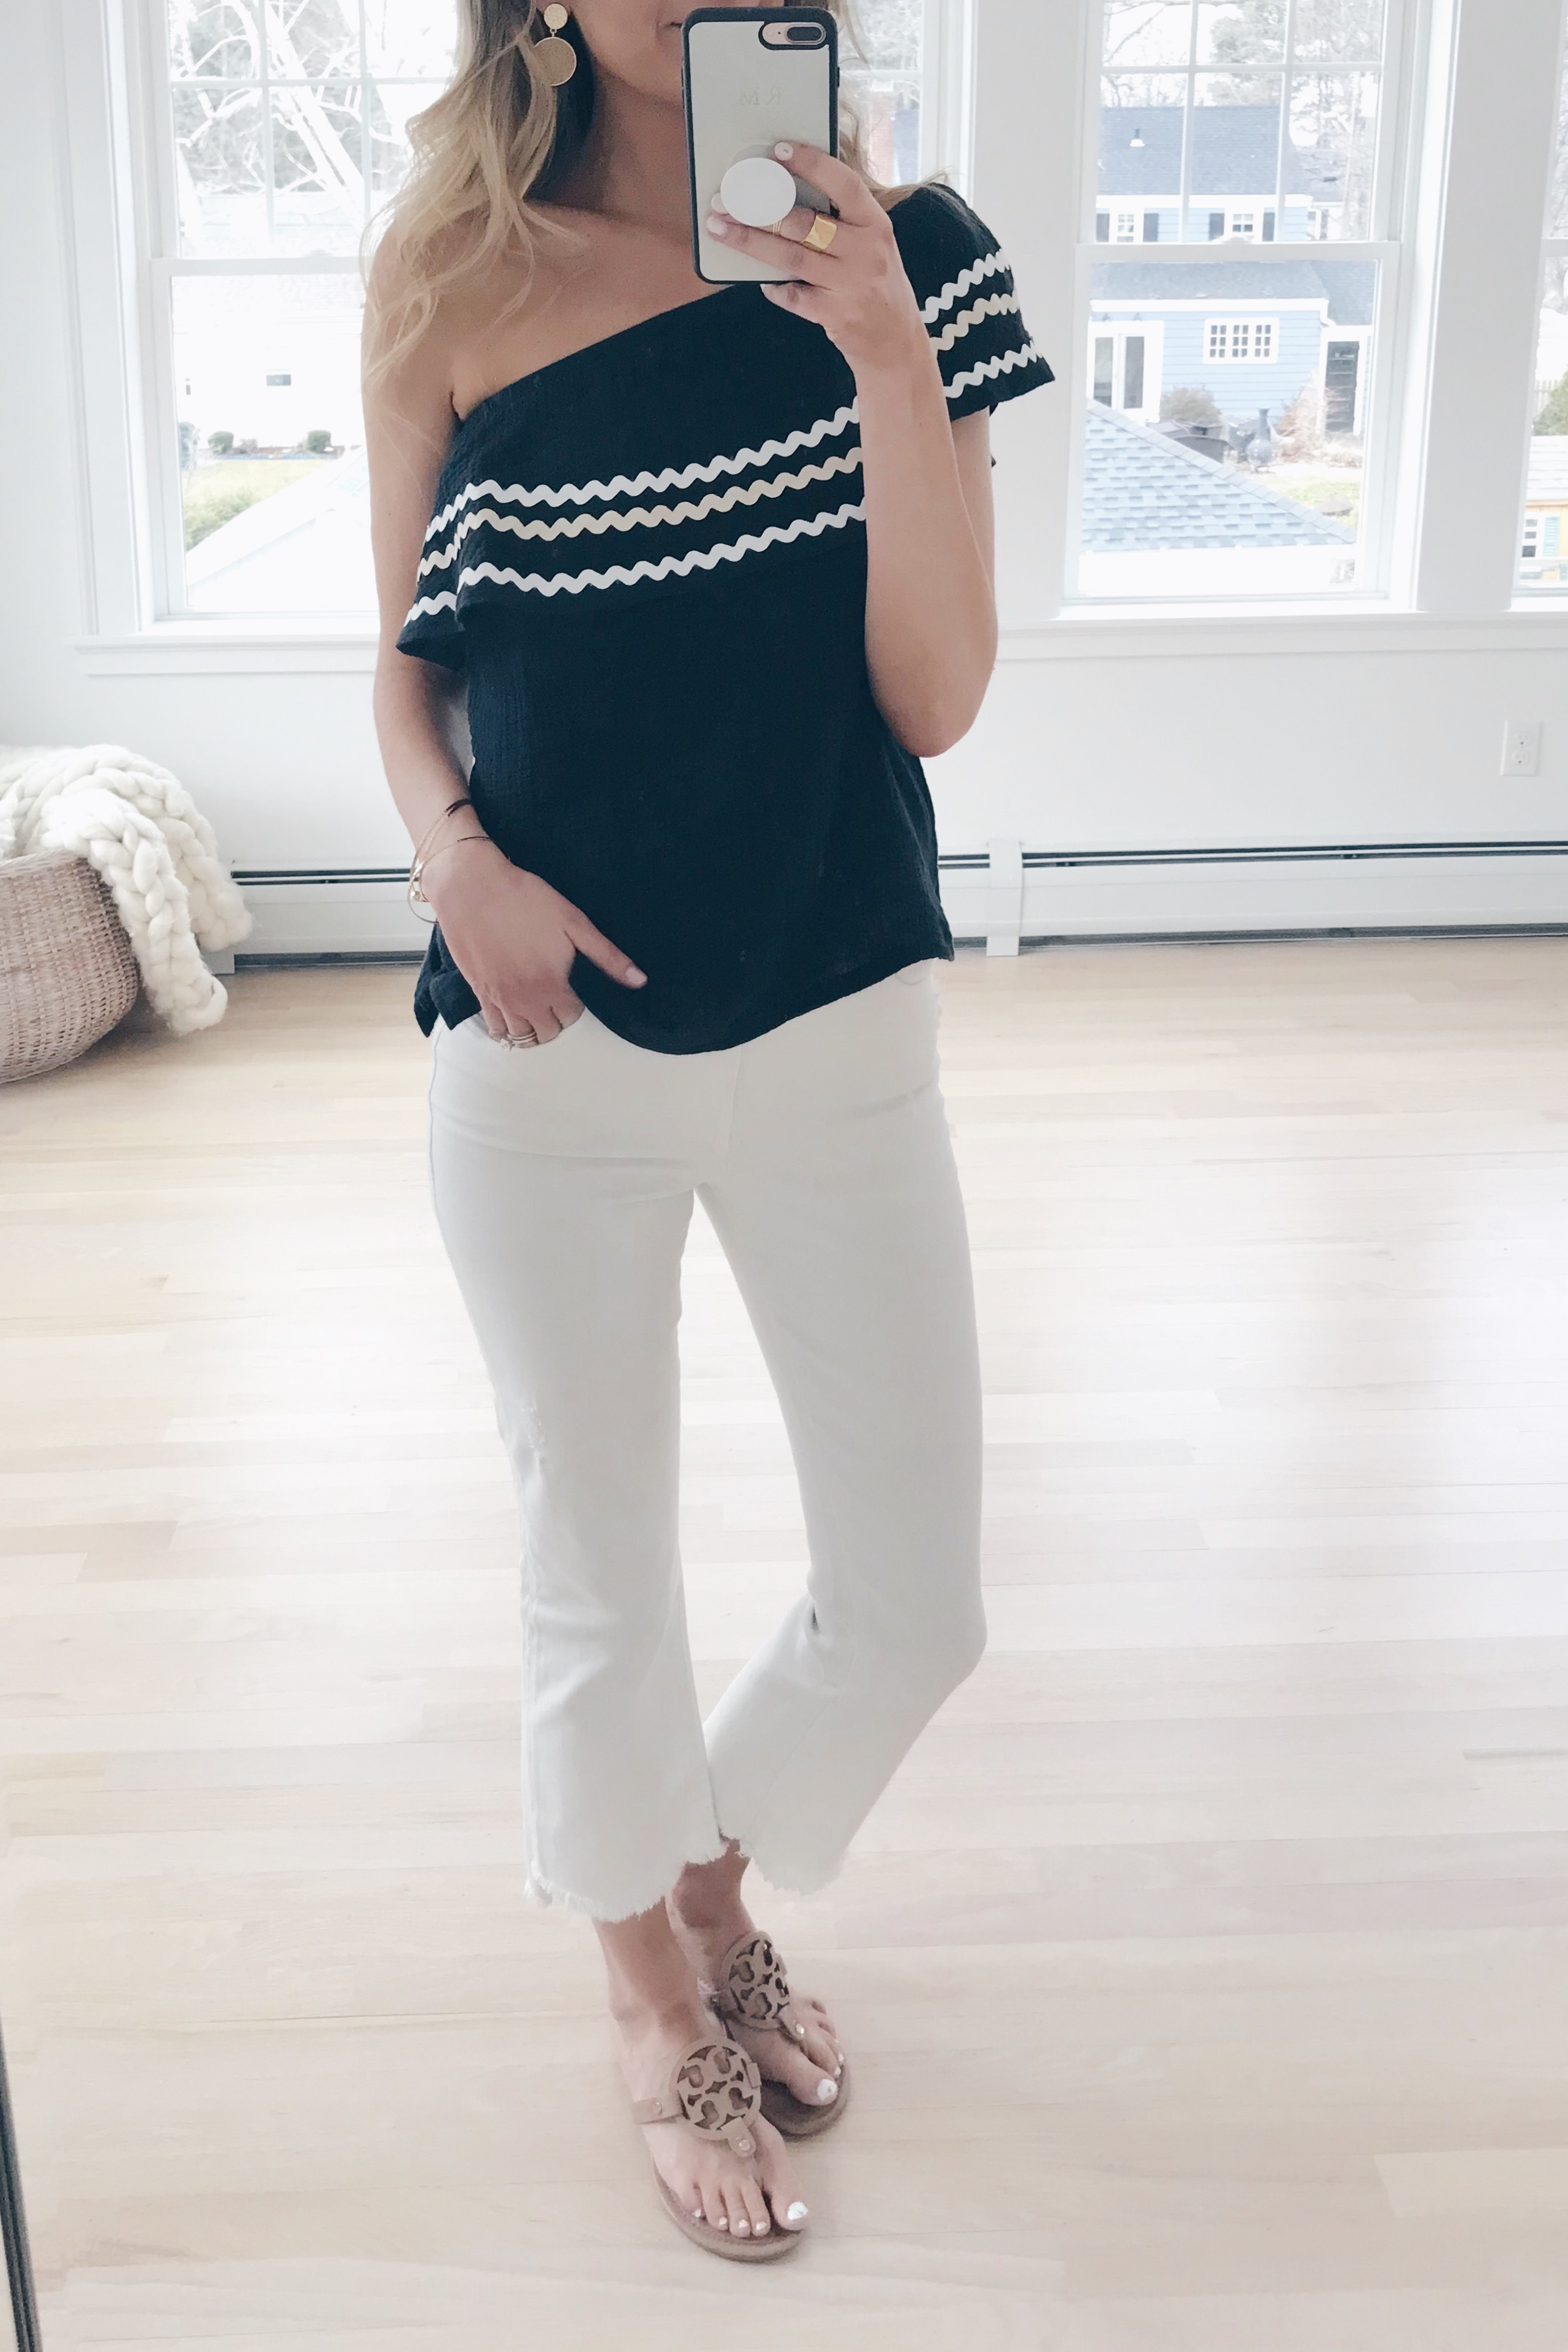  reosrt wear 2019 - black one shoulder gibson top and cropped white jeans on pinteresting plans blog